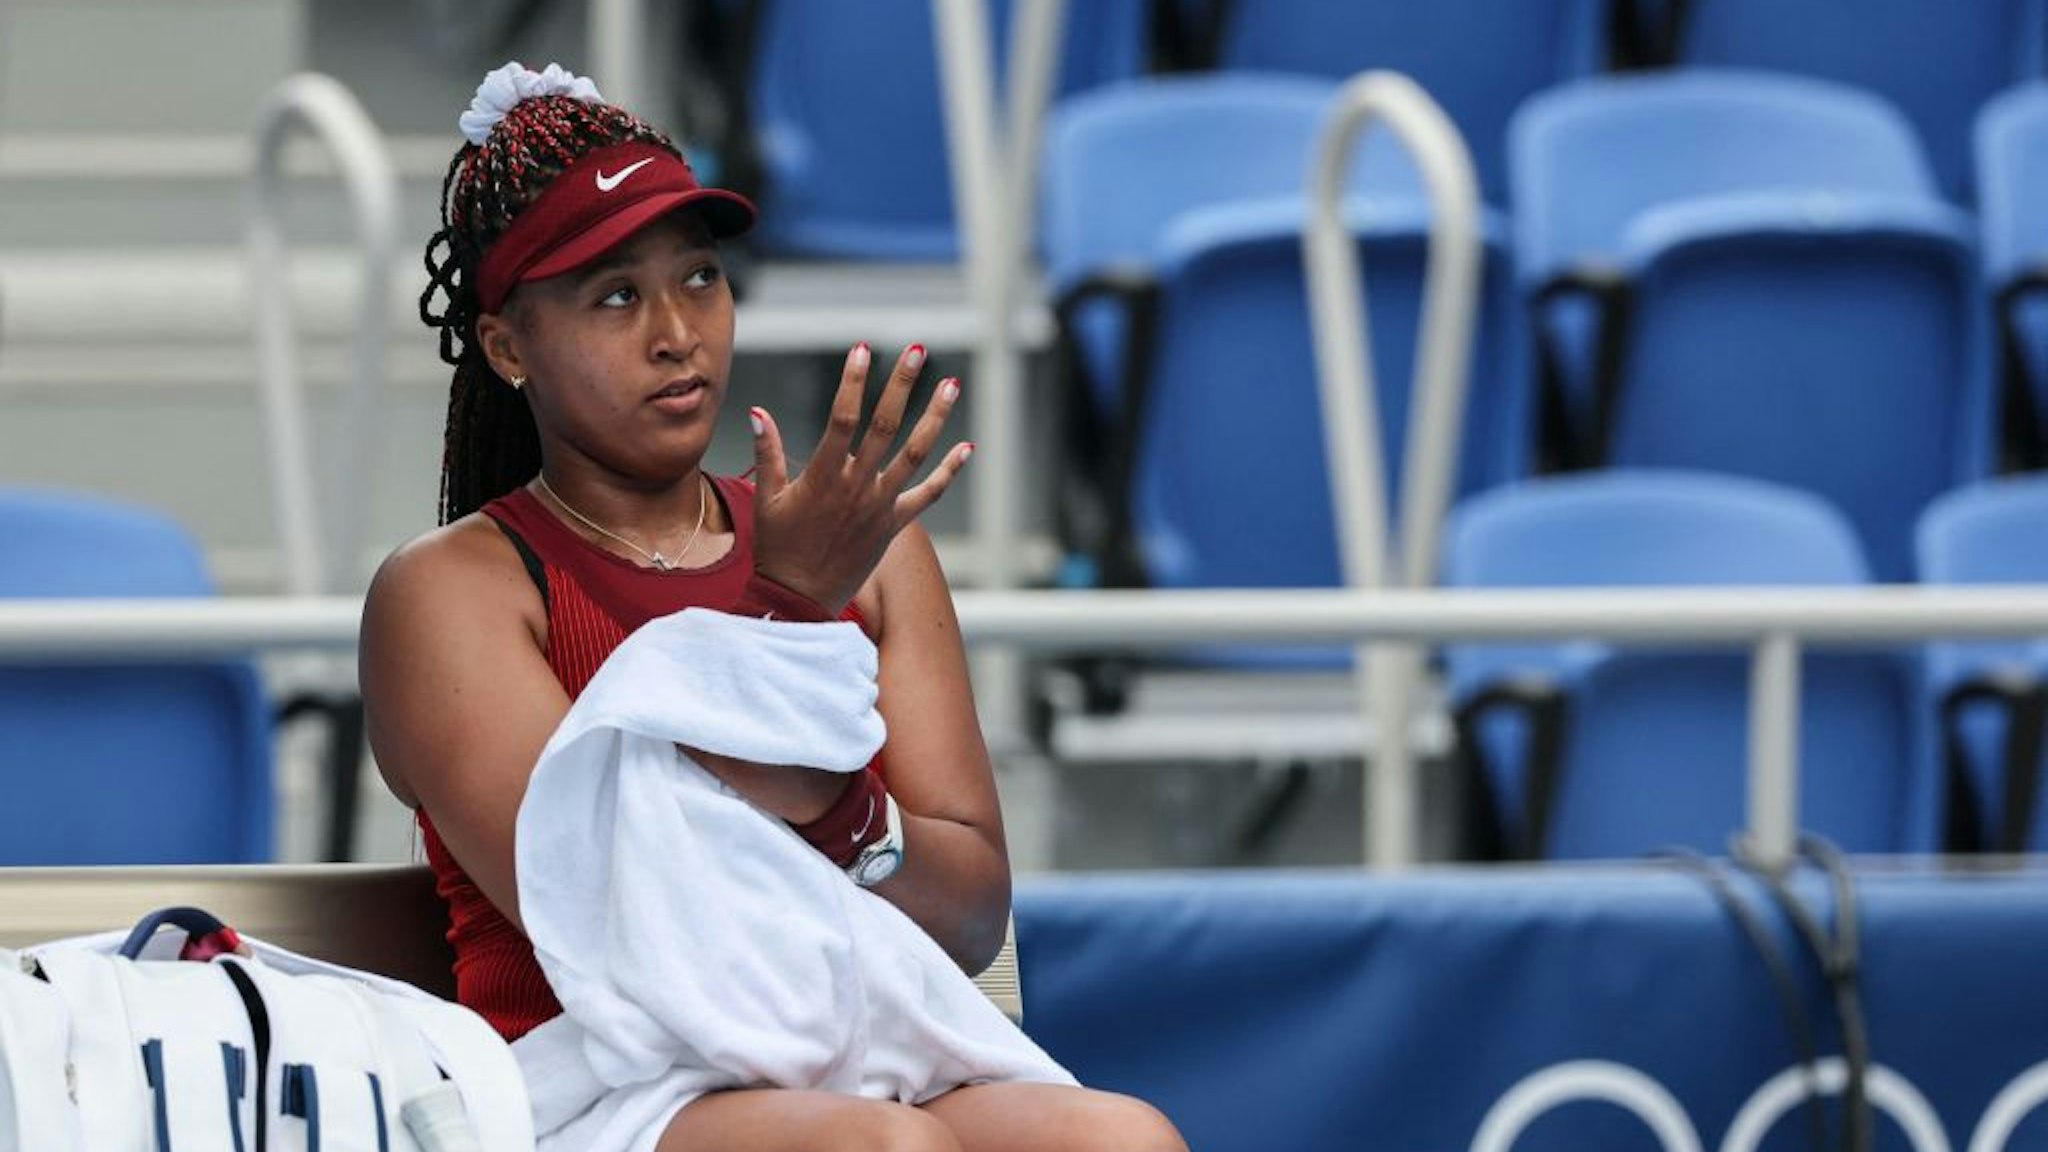 Japan's Naomi Osaka looks on as she pauses between games during their Tokyo 2020 Olympic Games women's singles second round tennis match against Switzerland's Viktorija Golubic at the Ariake Tennis Park in Tokyo on July 26, 2021. (Photo by Giuseppe CACACE / AFP) (Photo by GIUSEPPE CACACE/AFP via Getty Images)